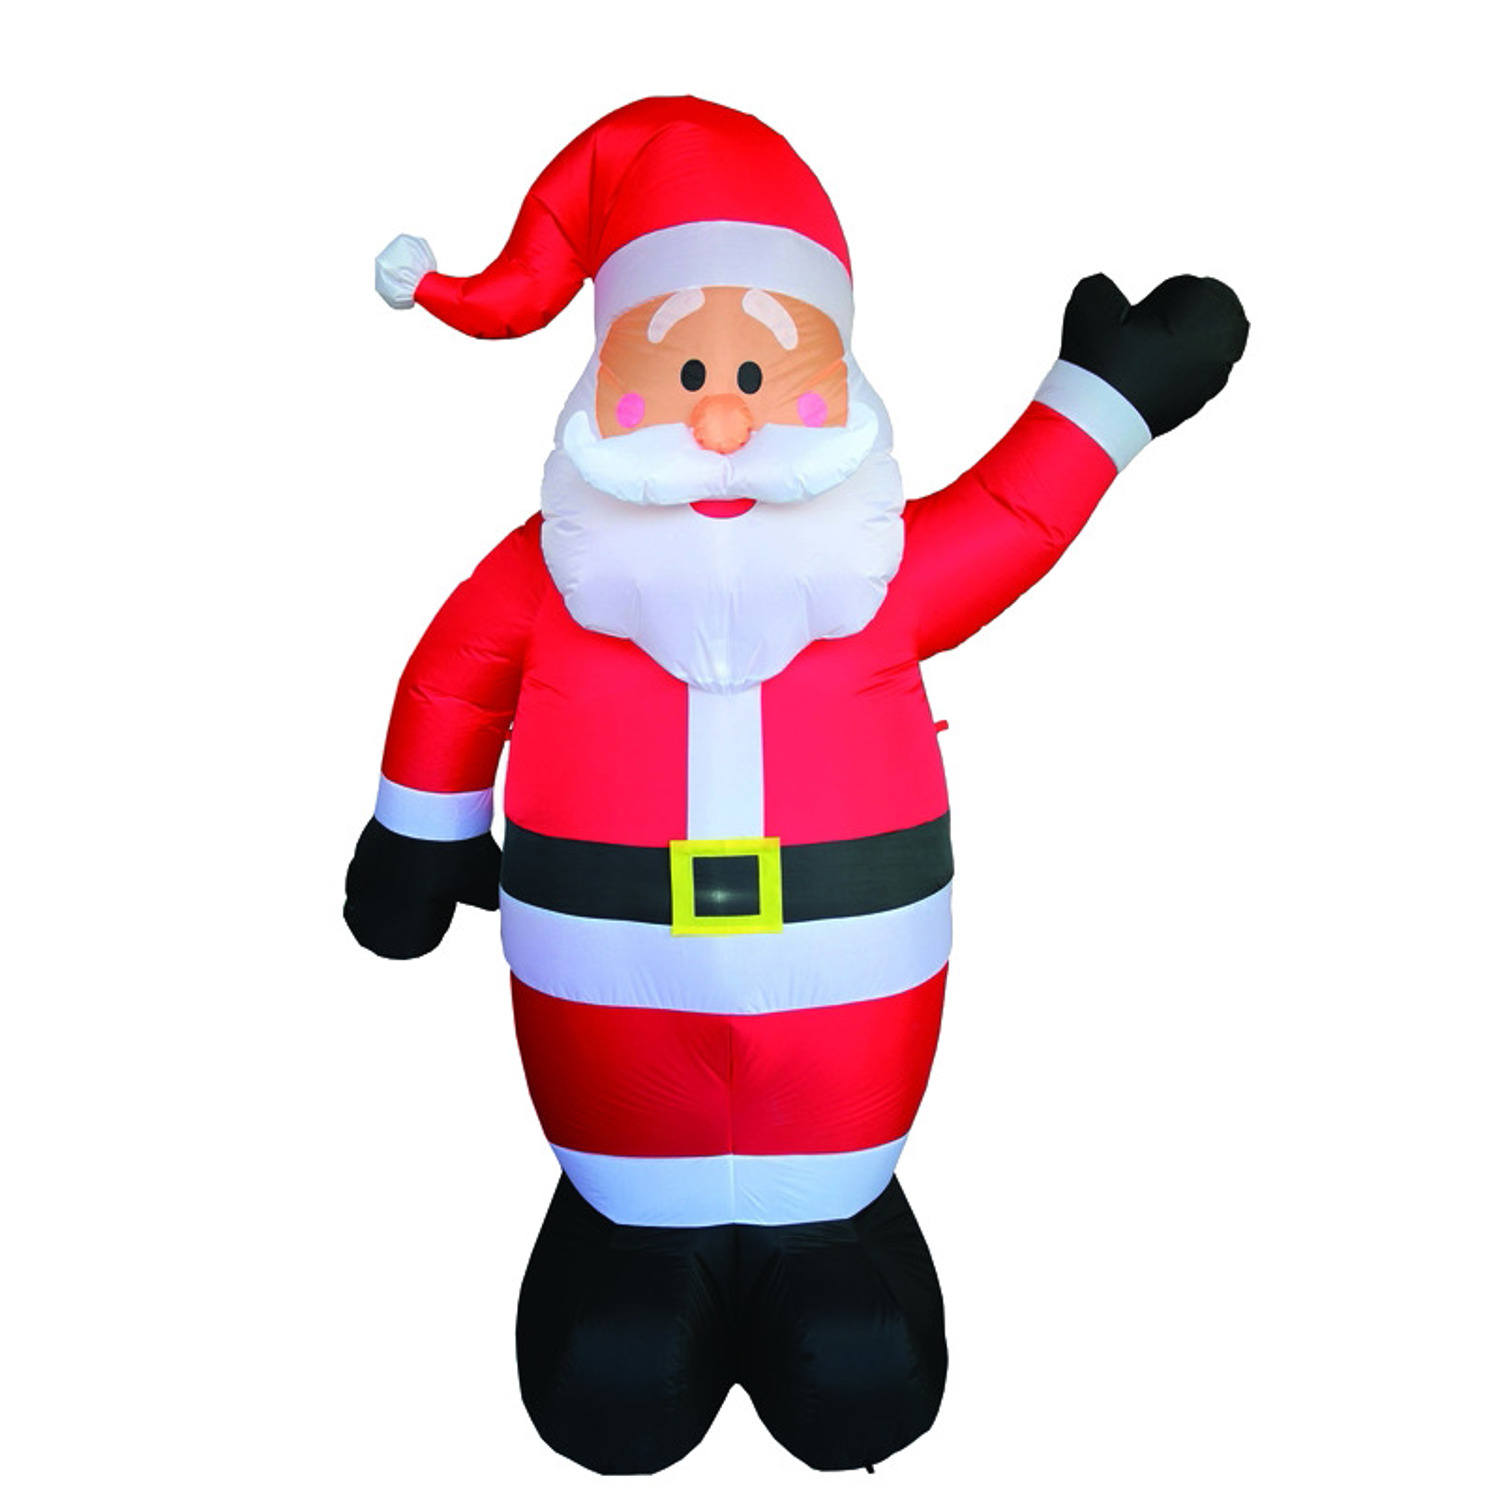 The Christmas Workshop 6ft Santa Countdown Approx 183cm High x 80cm Wide x 70cm Deep Red